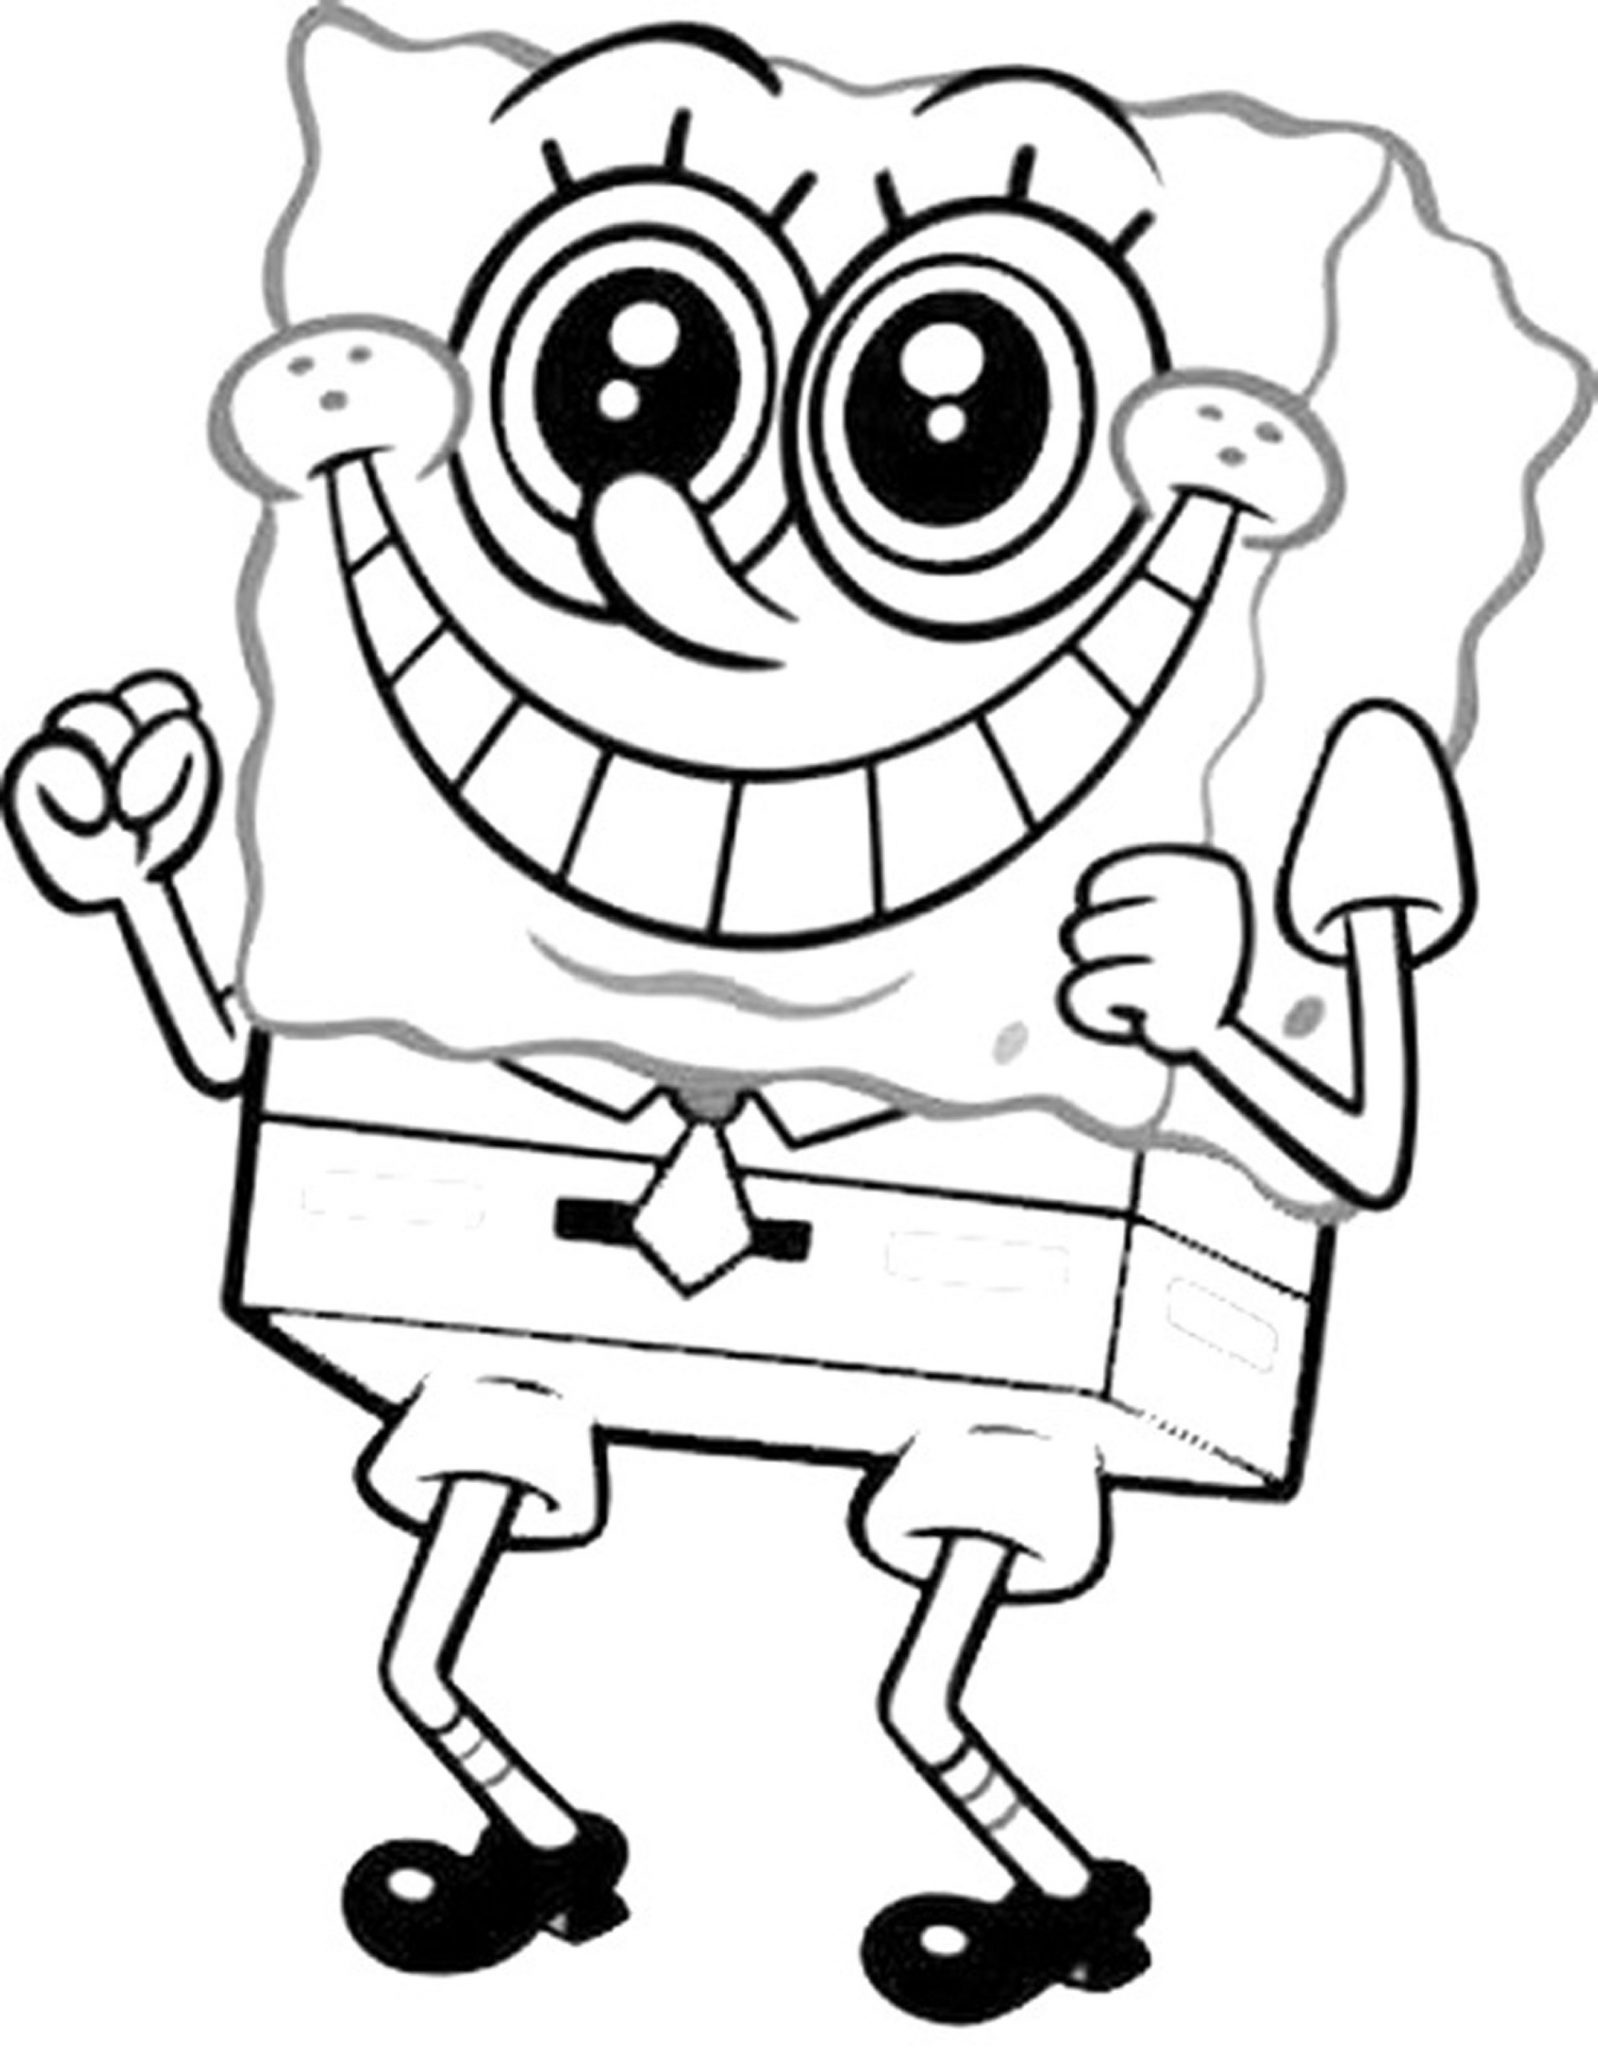 Download Print & Download - Choosing SpongeBob Coloring Pages For Your Children